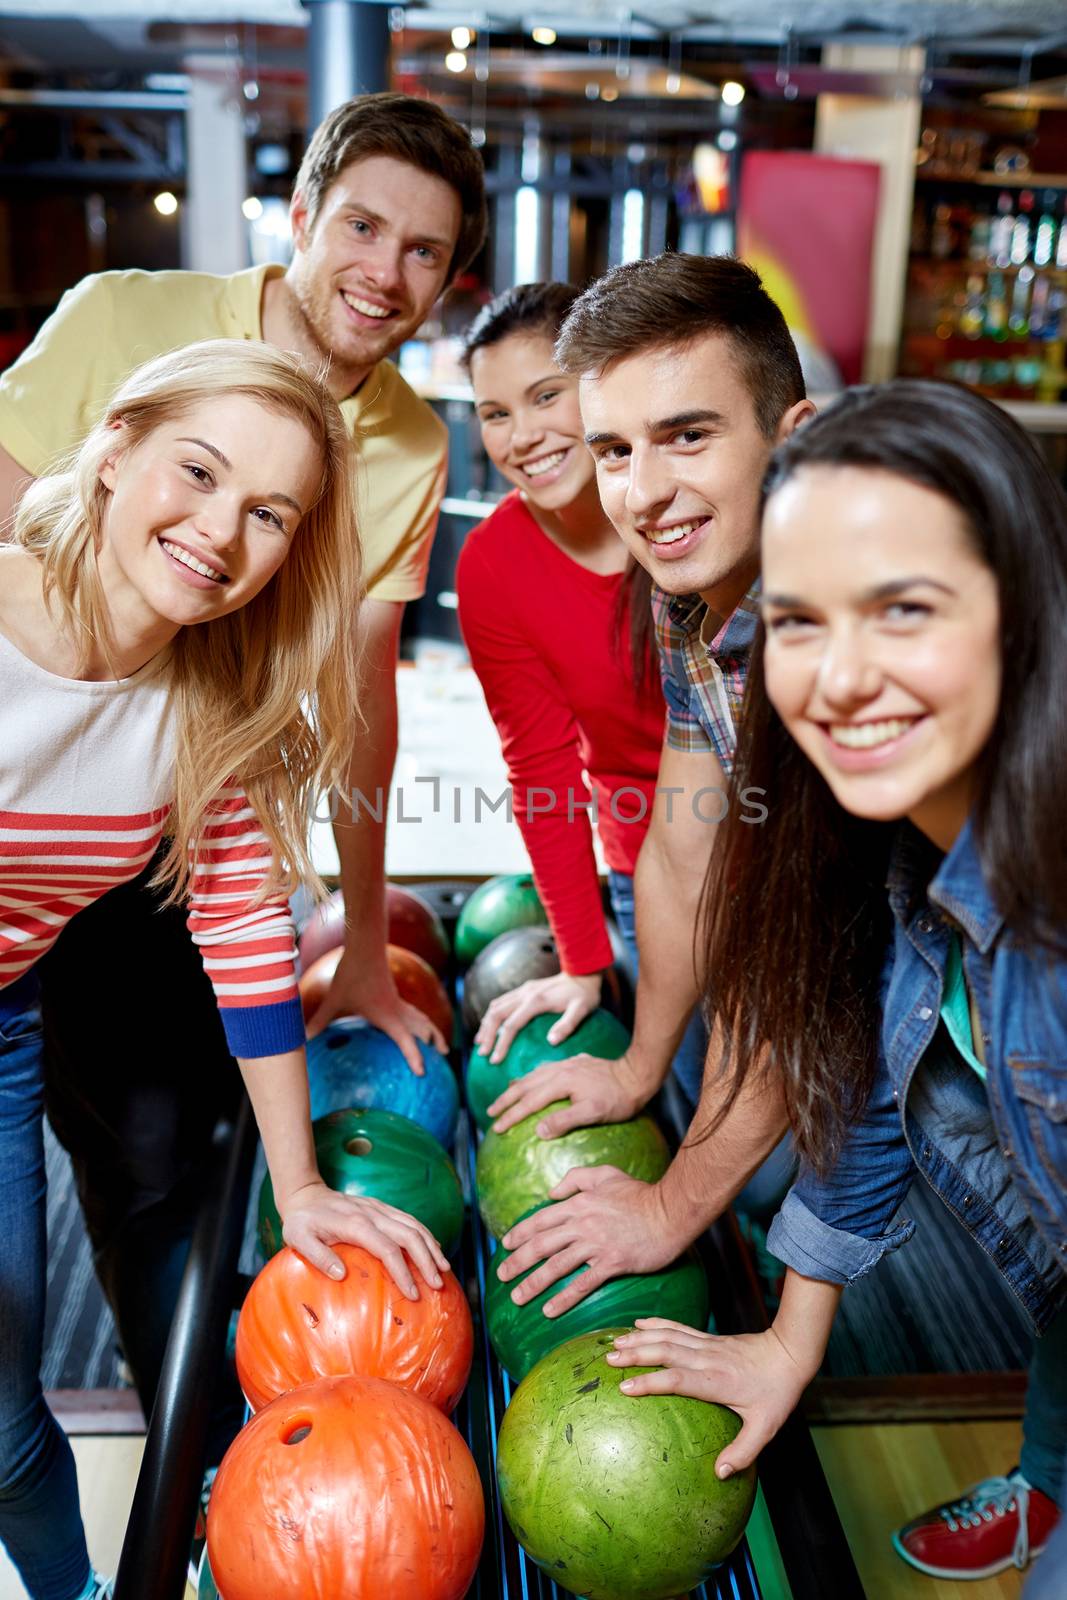 people, leisure, sport, friendship and entertainment concept - happy friends in bowling club